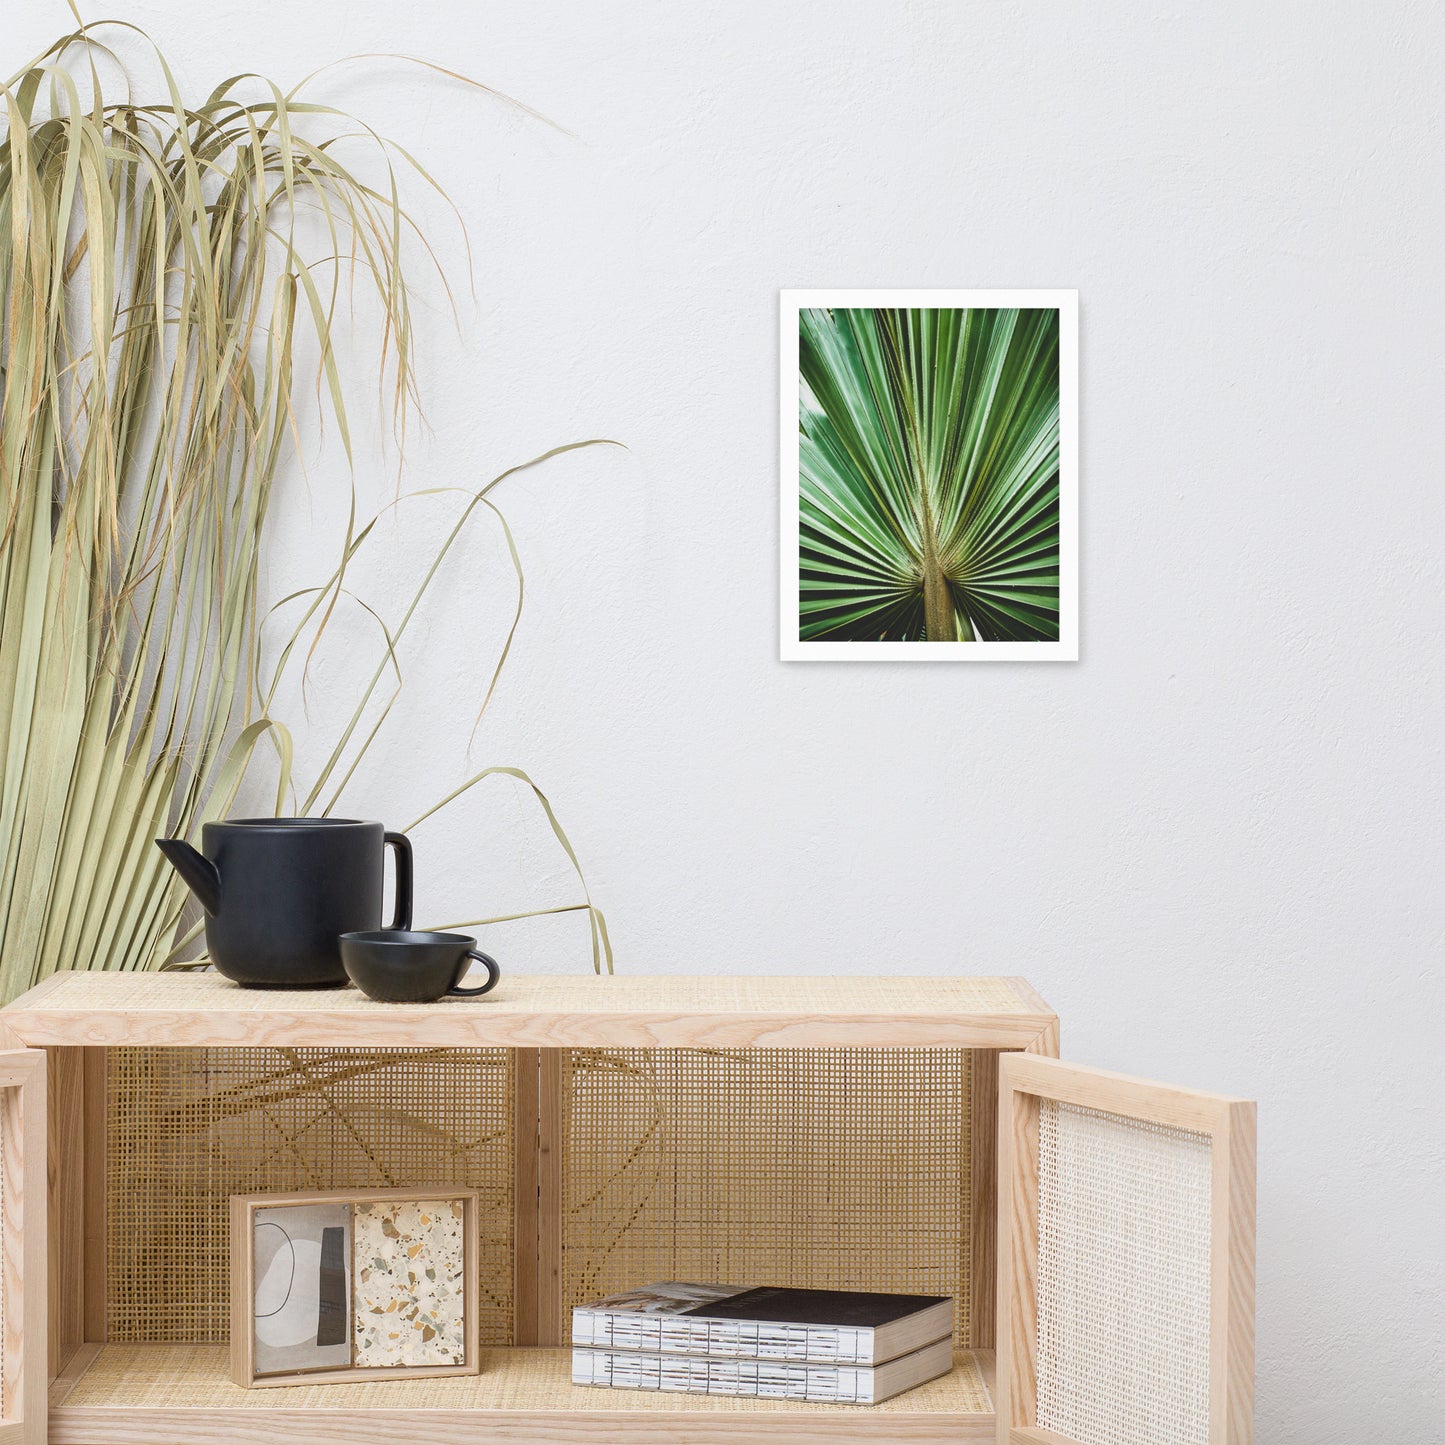 Rustic Dining Room Wall Decor: Aged and Colorized Wide Palm Leaves 2 Tropical Botanical / Nature Photo Framed Wall Art Print - Artwork - Wall Decor